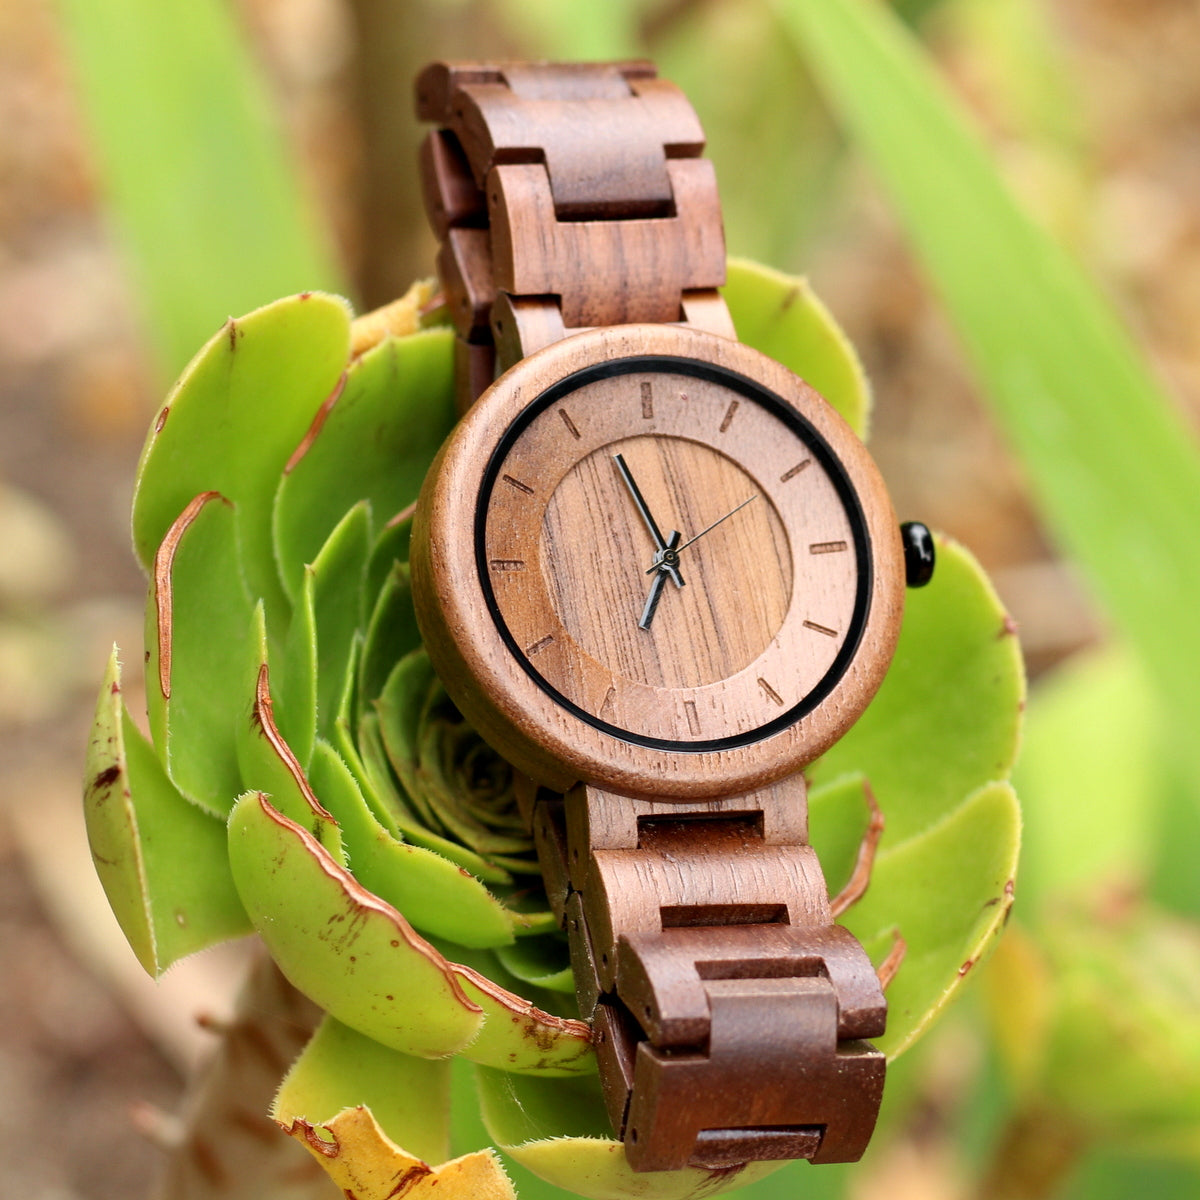 Our ECO-BEAN unisex wooden watch, walnut watch face and matching strap, 39mm, lightweight and stylish. Engrave a short message on the back for R80.